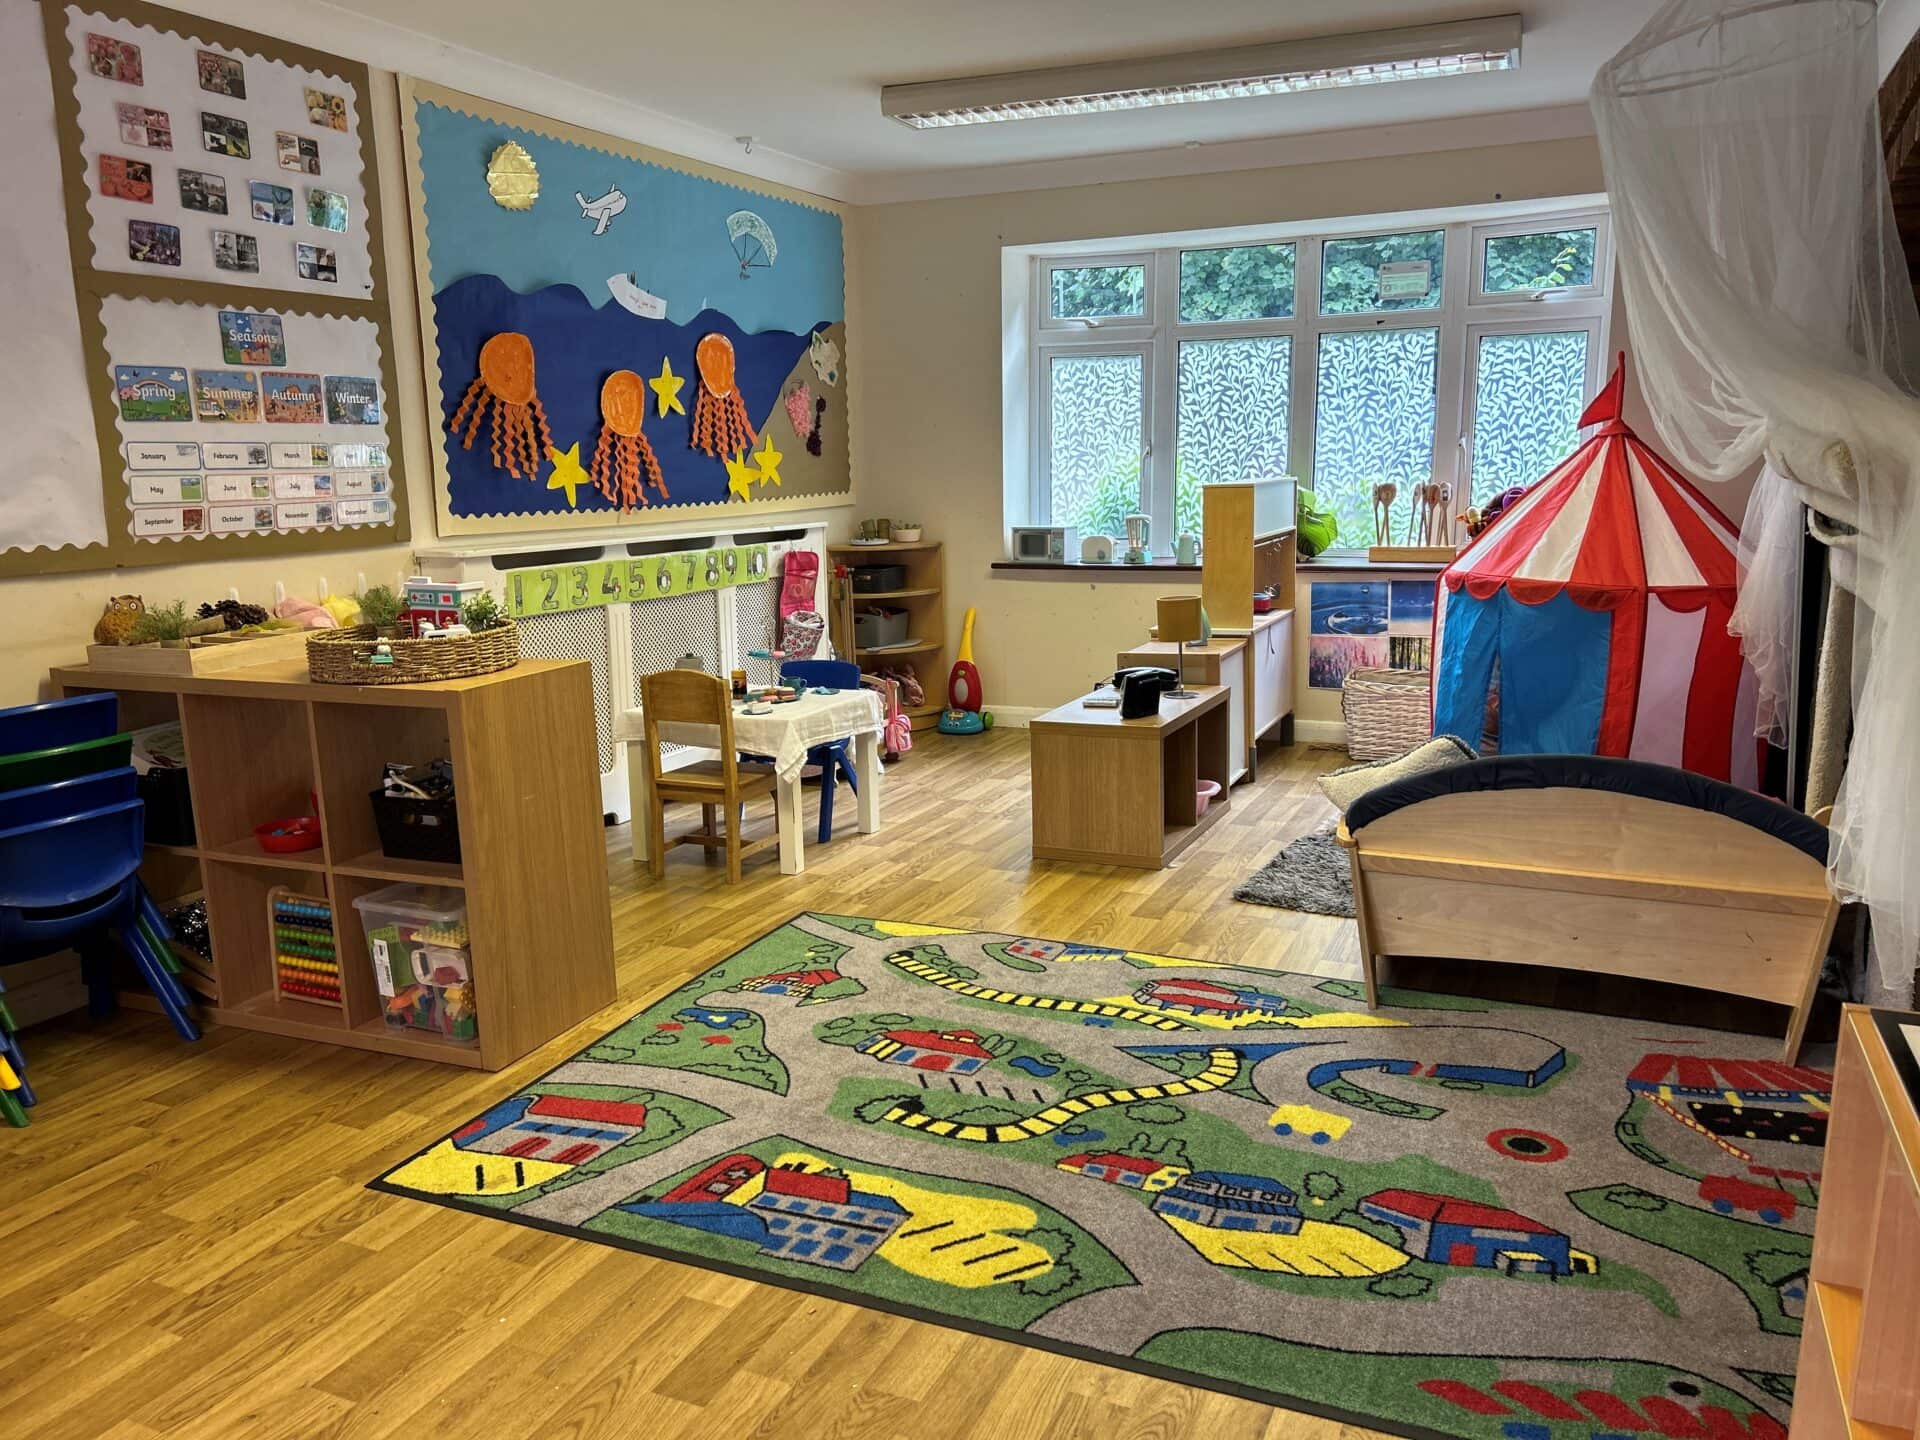 A child's playroom with toys and a rug.